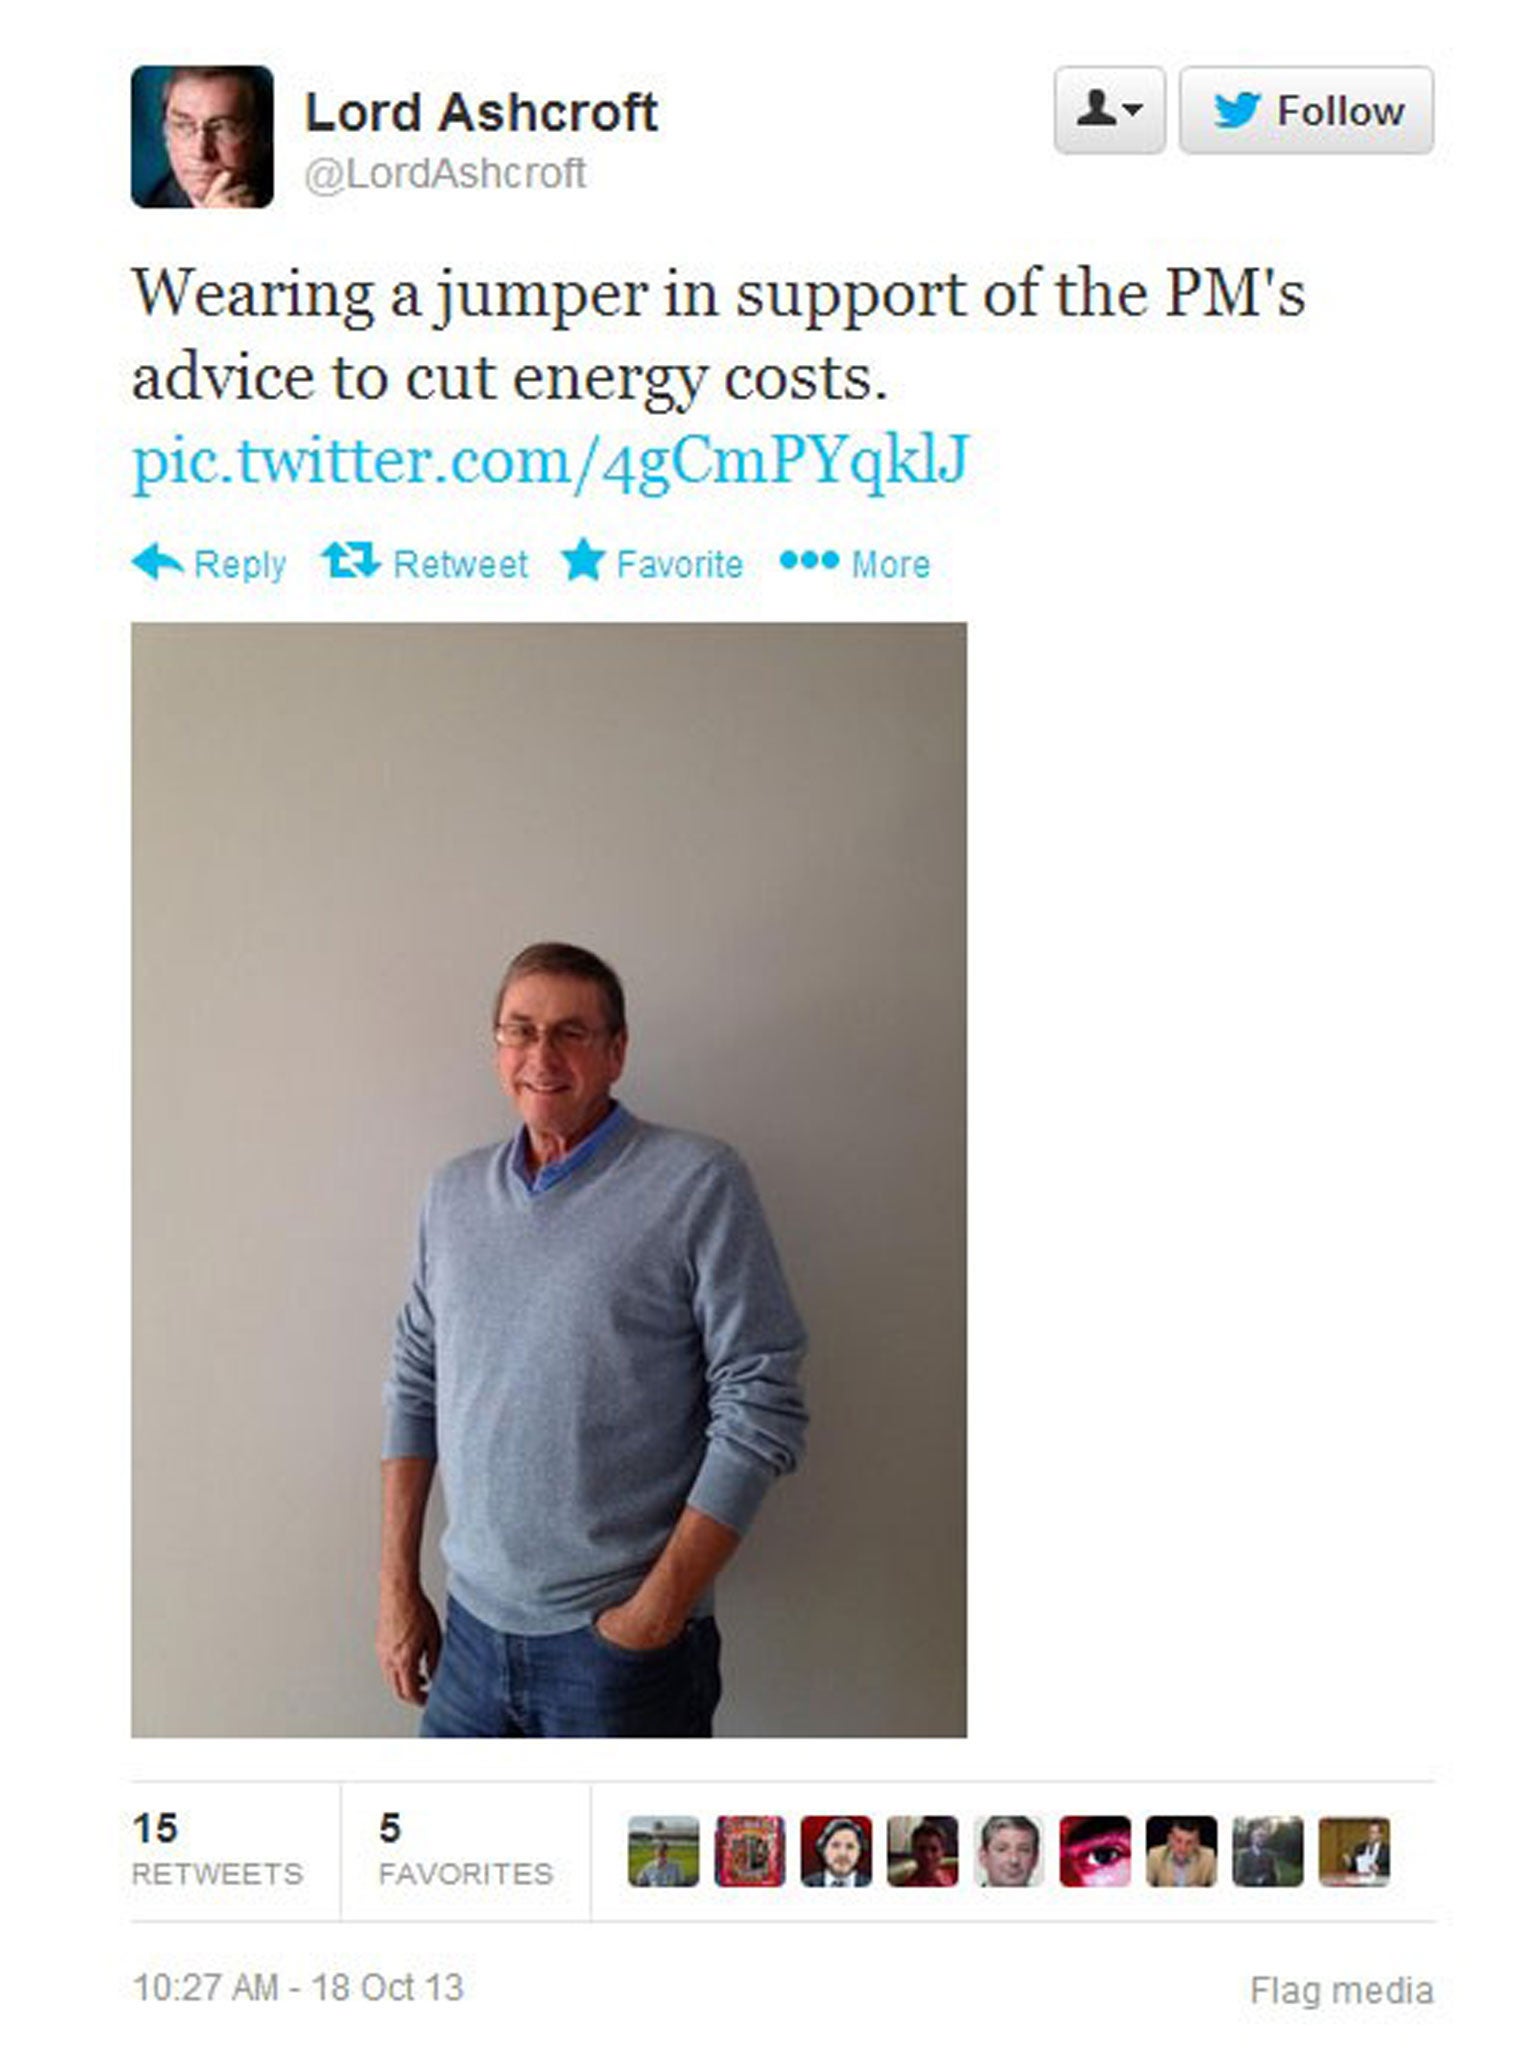 Lord Ashcroft tweeted a picture of himself in a jumper